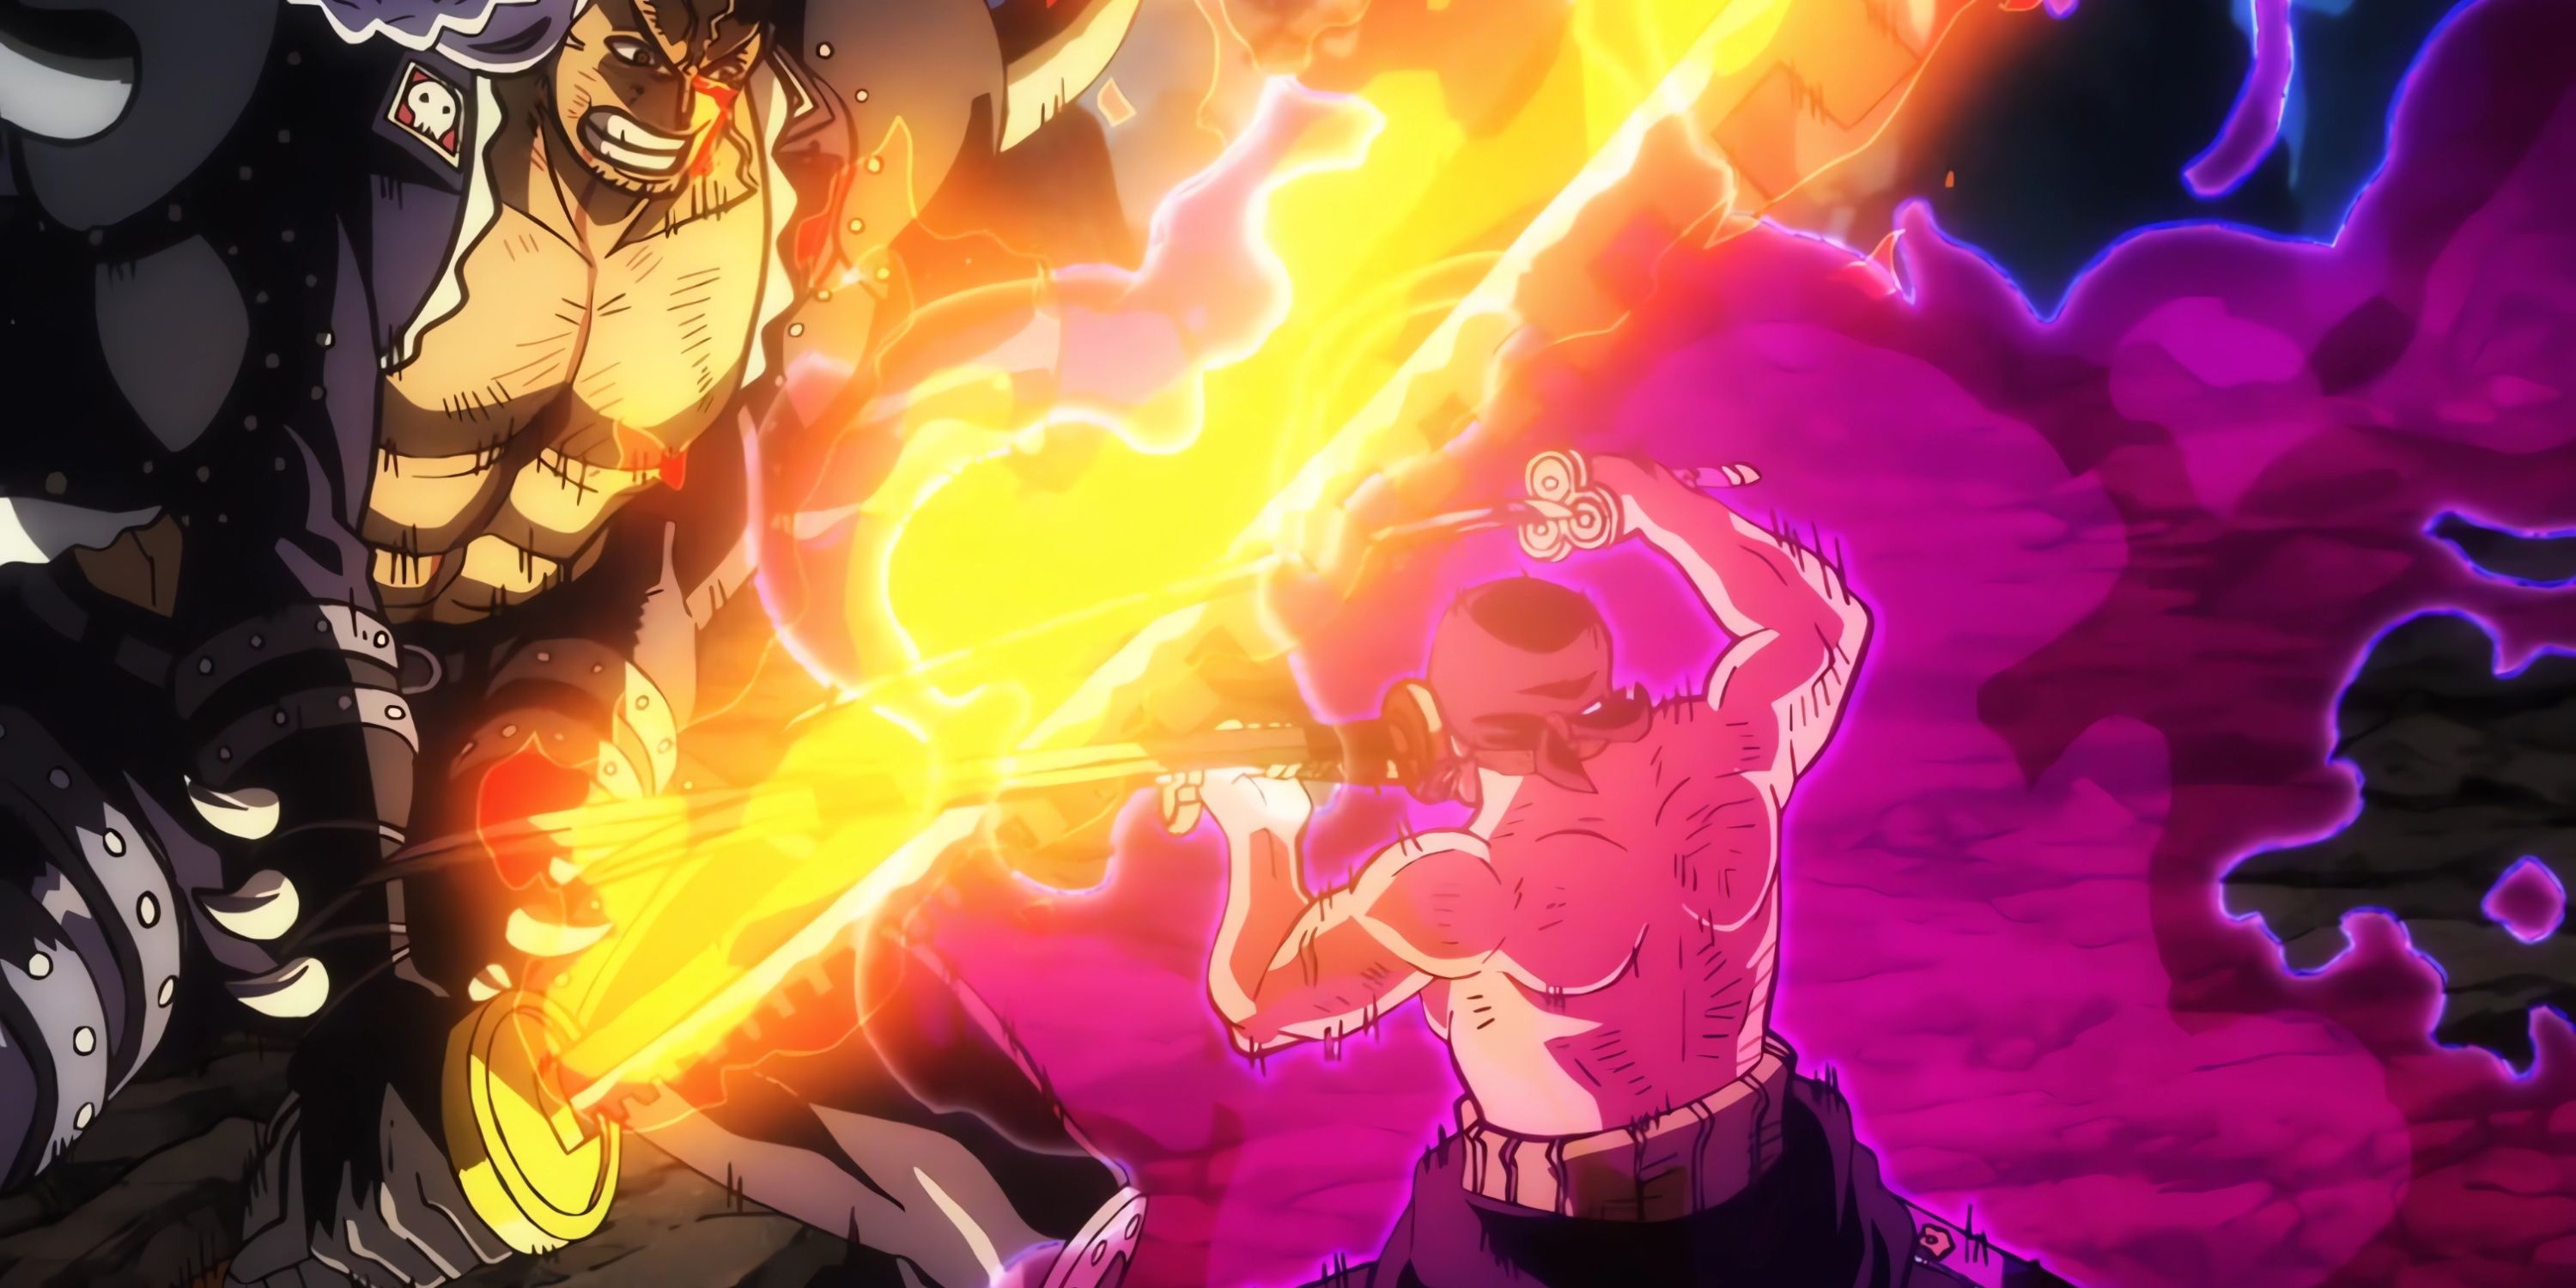 Roronoa Zoro squaring off with King the Conflagration in Episode 1062 of One Piece